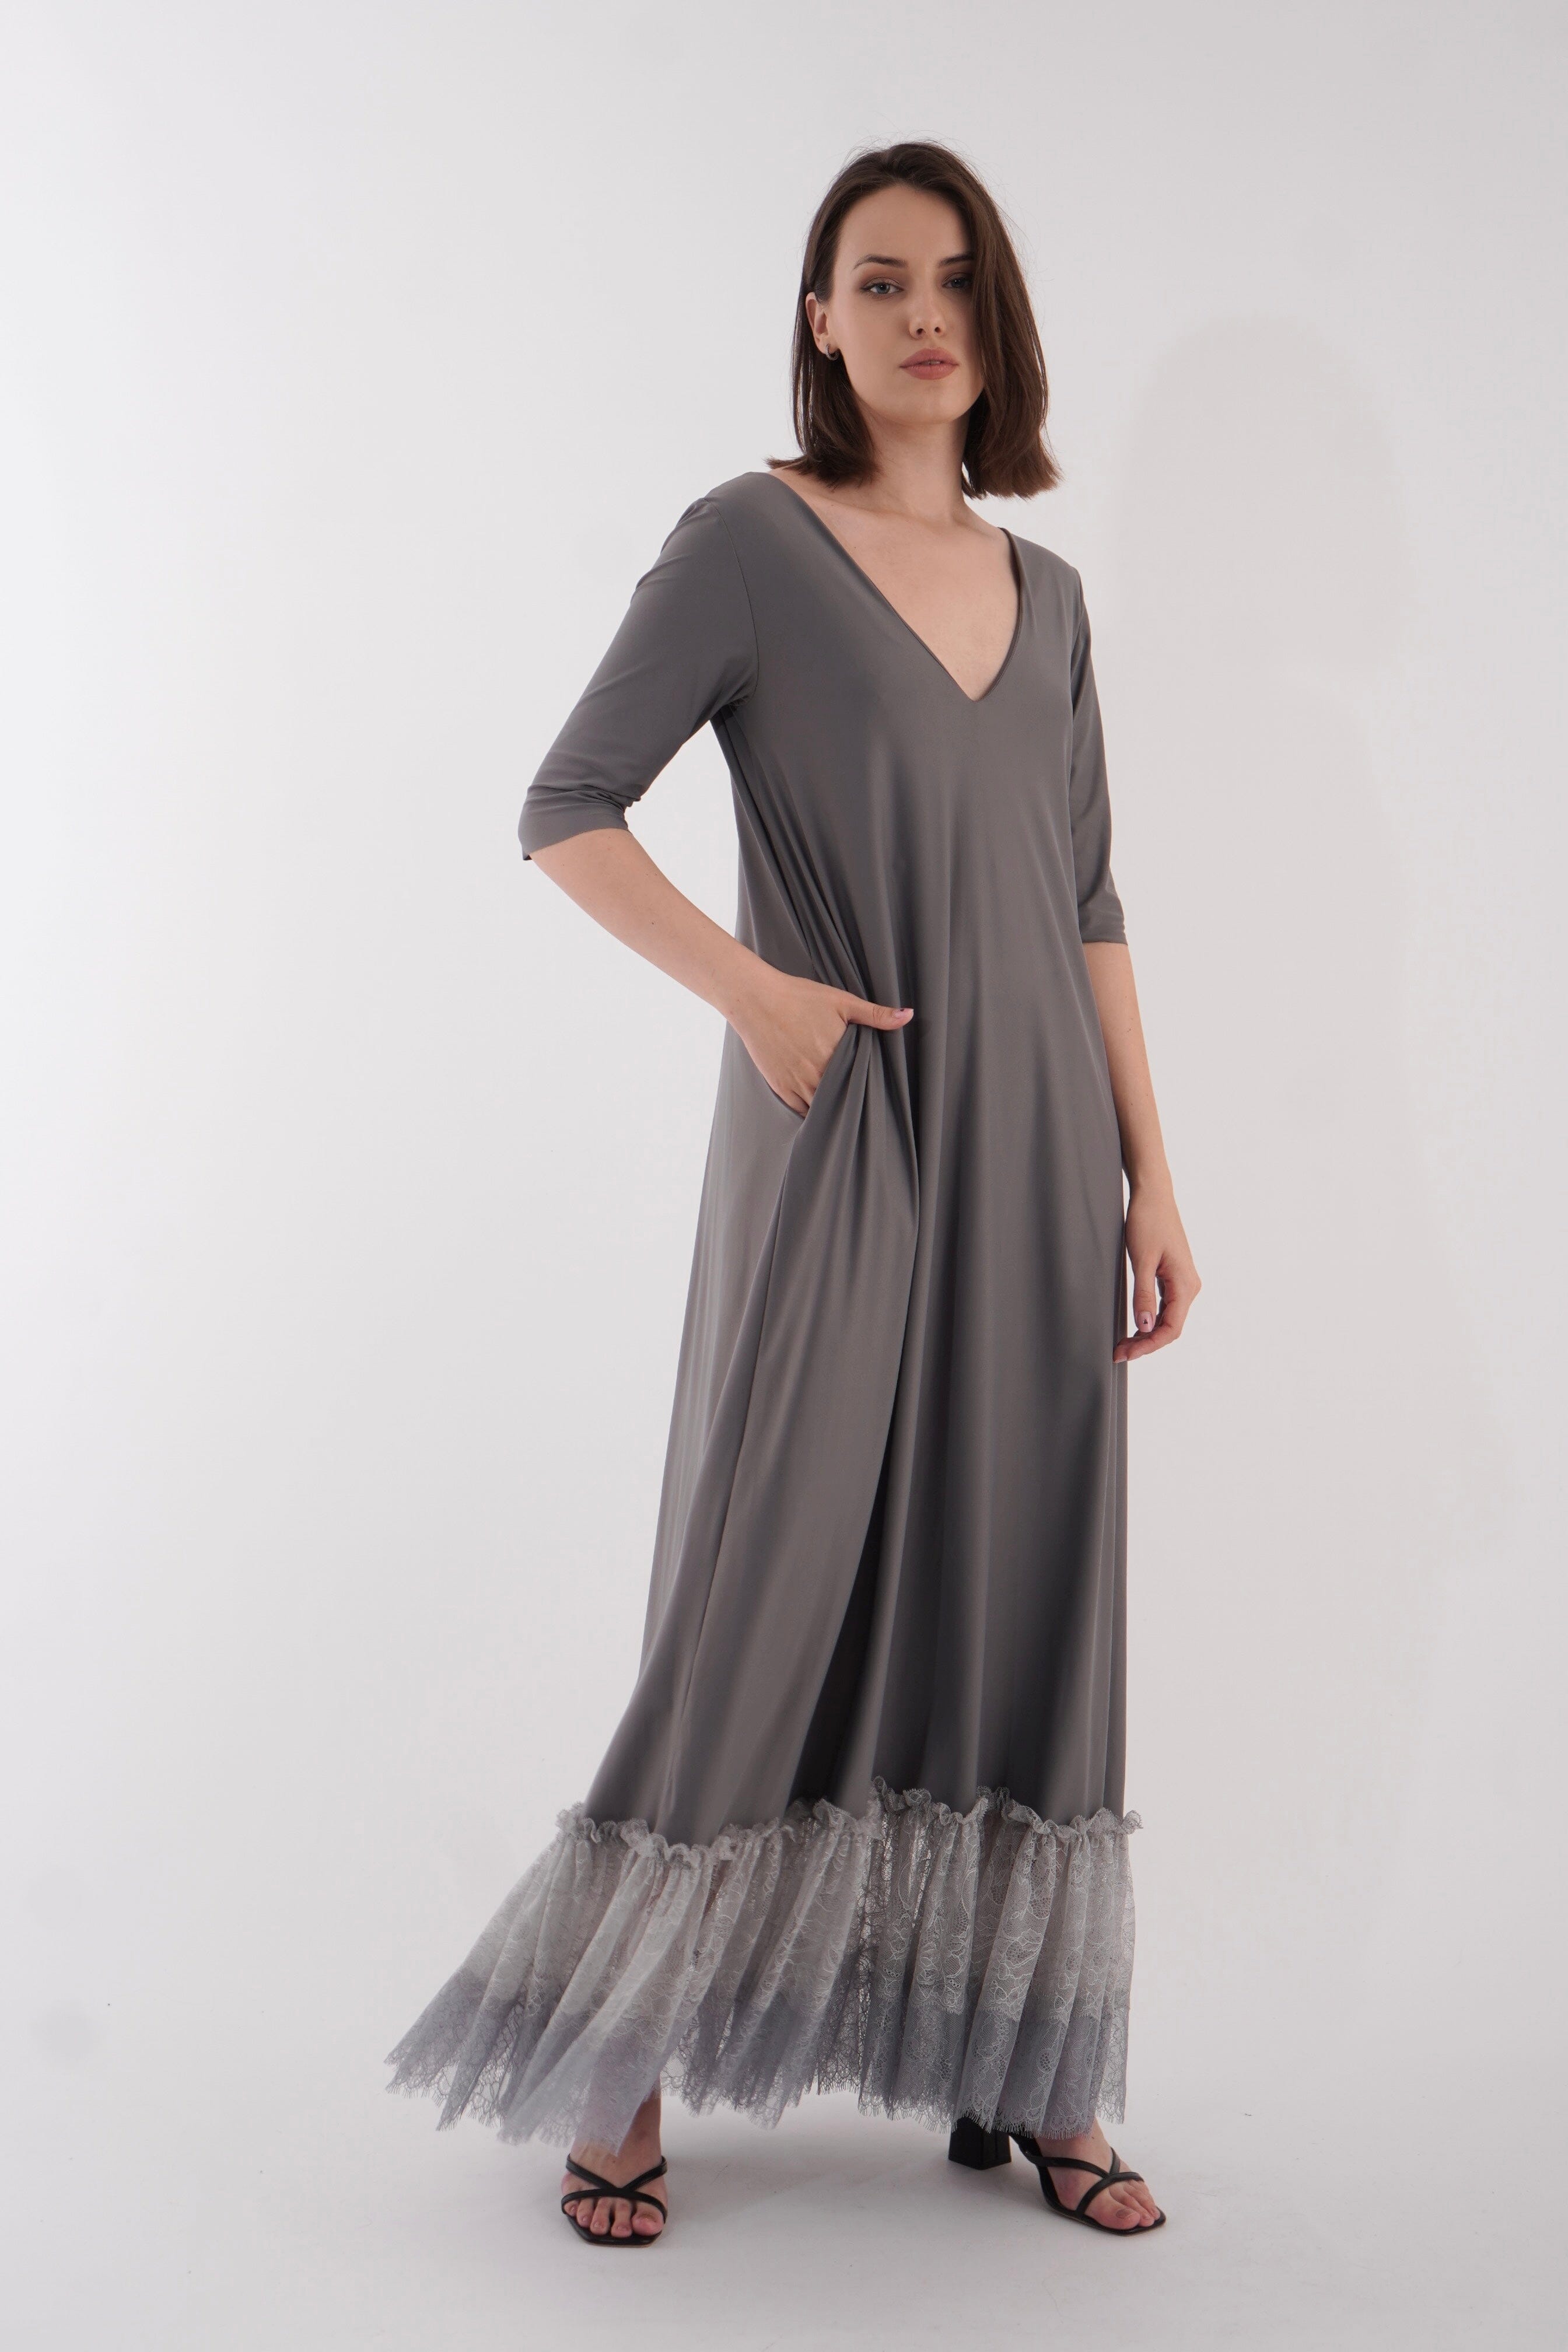  That's Love Dress Light Grey Product Amoralle